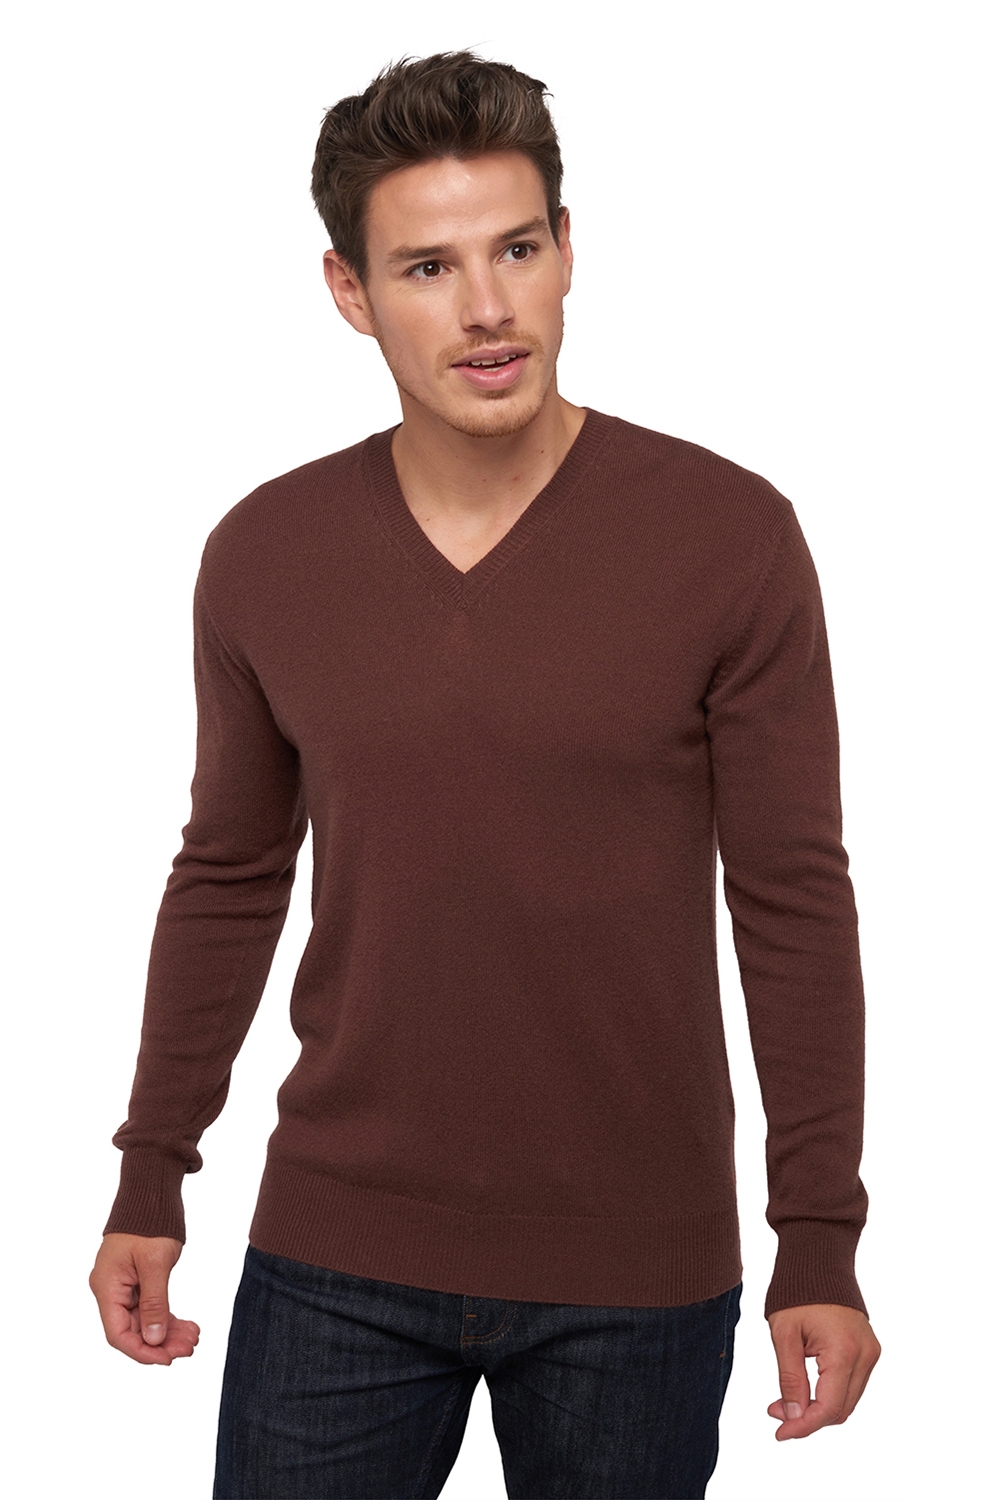 Cachemire petits prix homme tor first chocobrown l